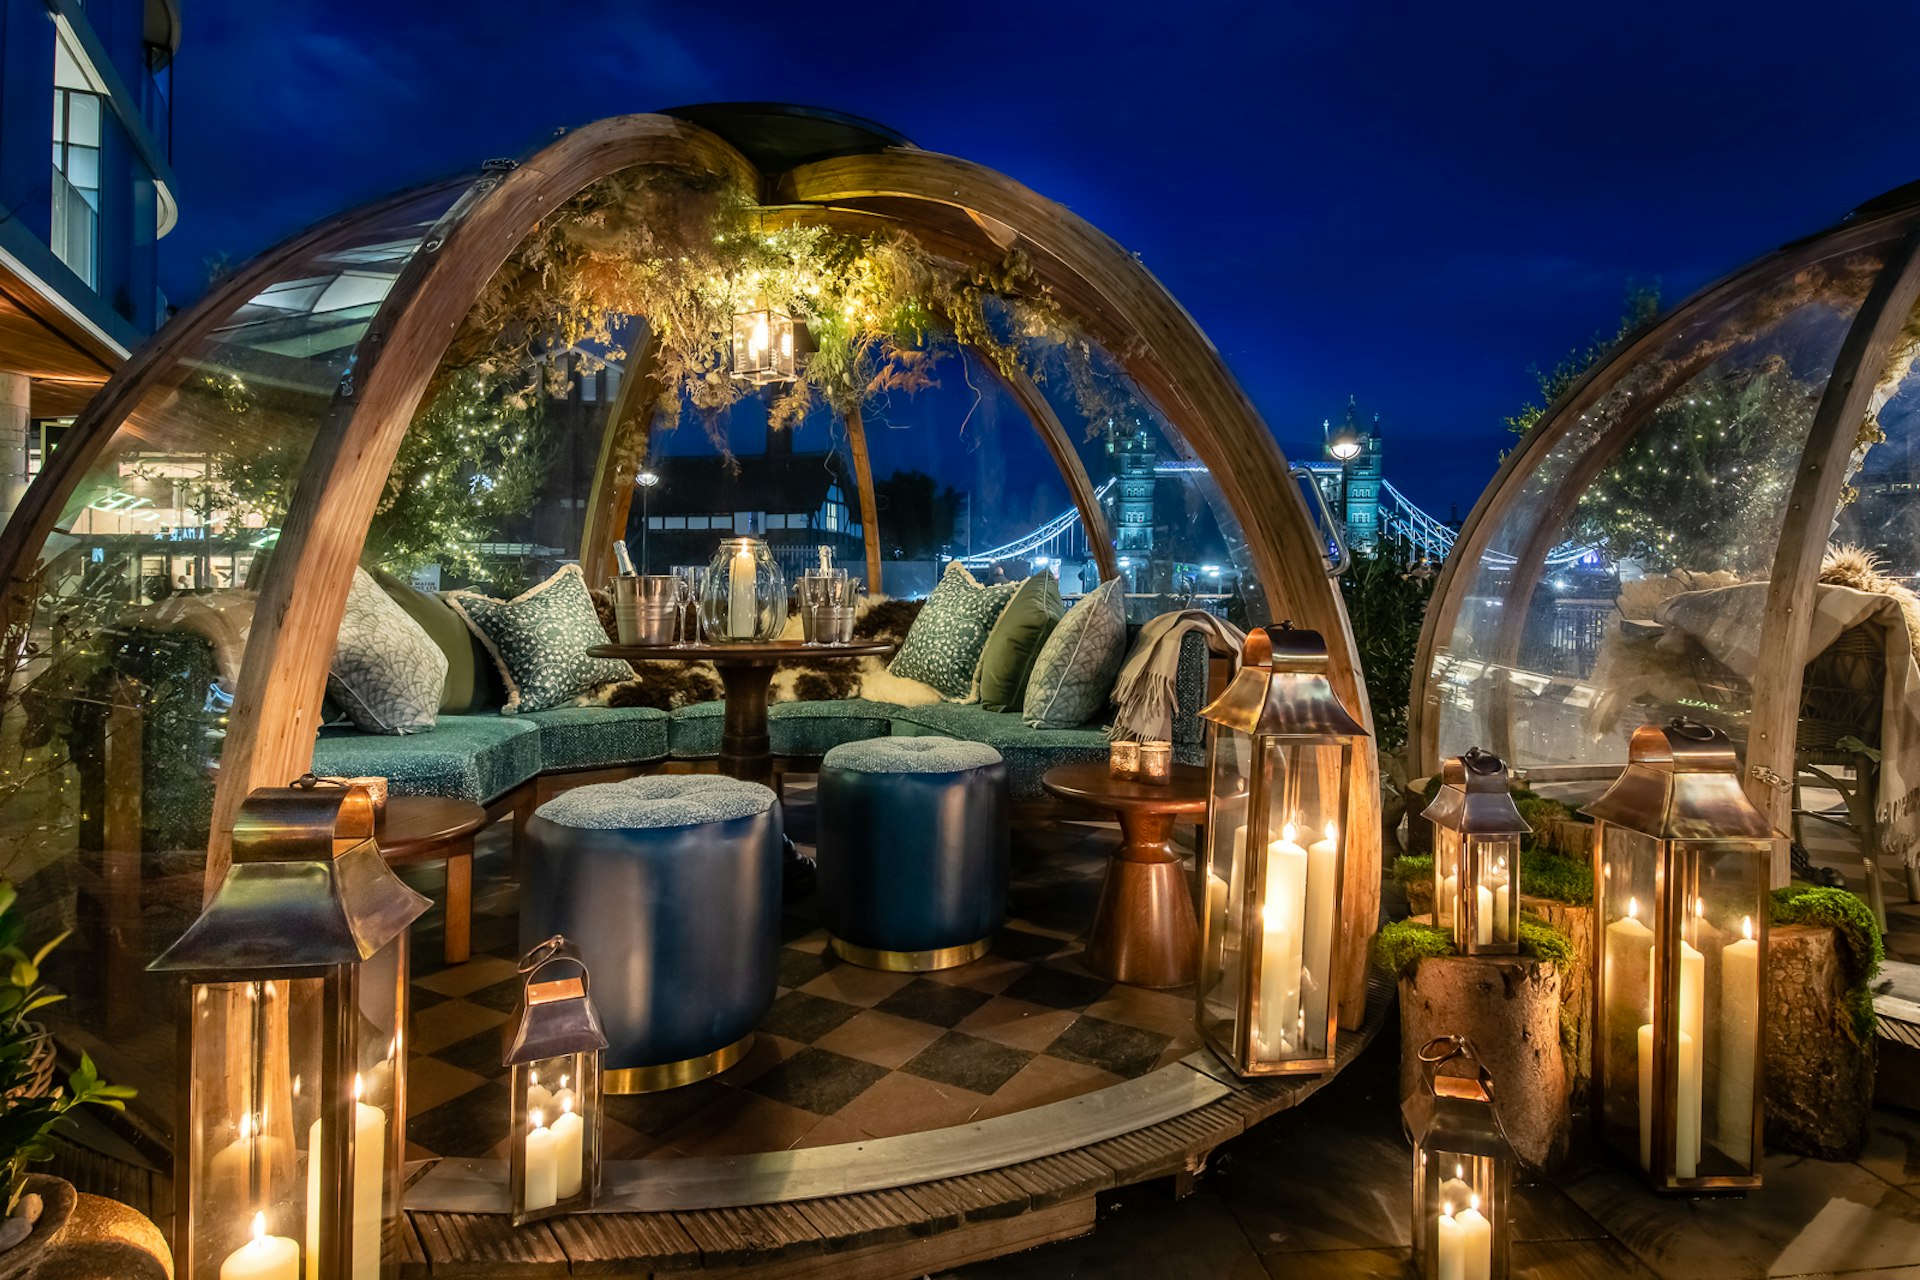 Stylish transparent igloos at Coppa Club in London are decorated with plush soft furnishings, large church candles inside glass lanterns and festive garlands.